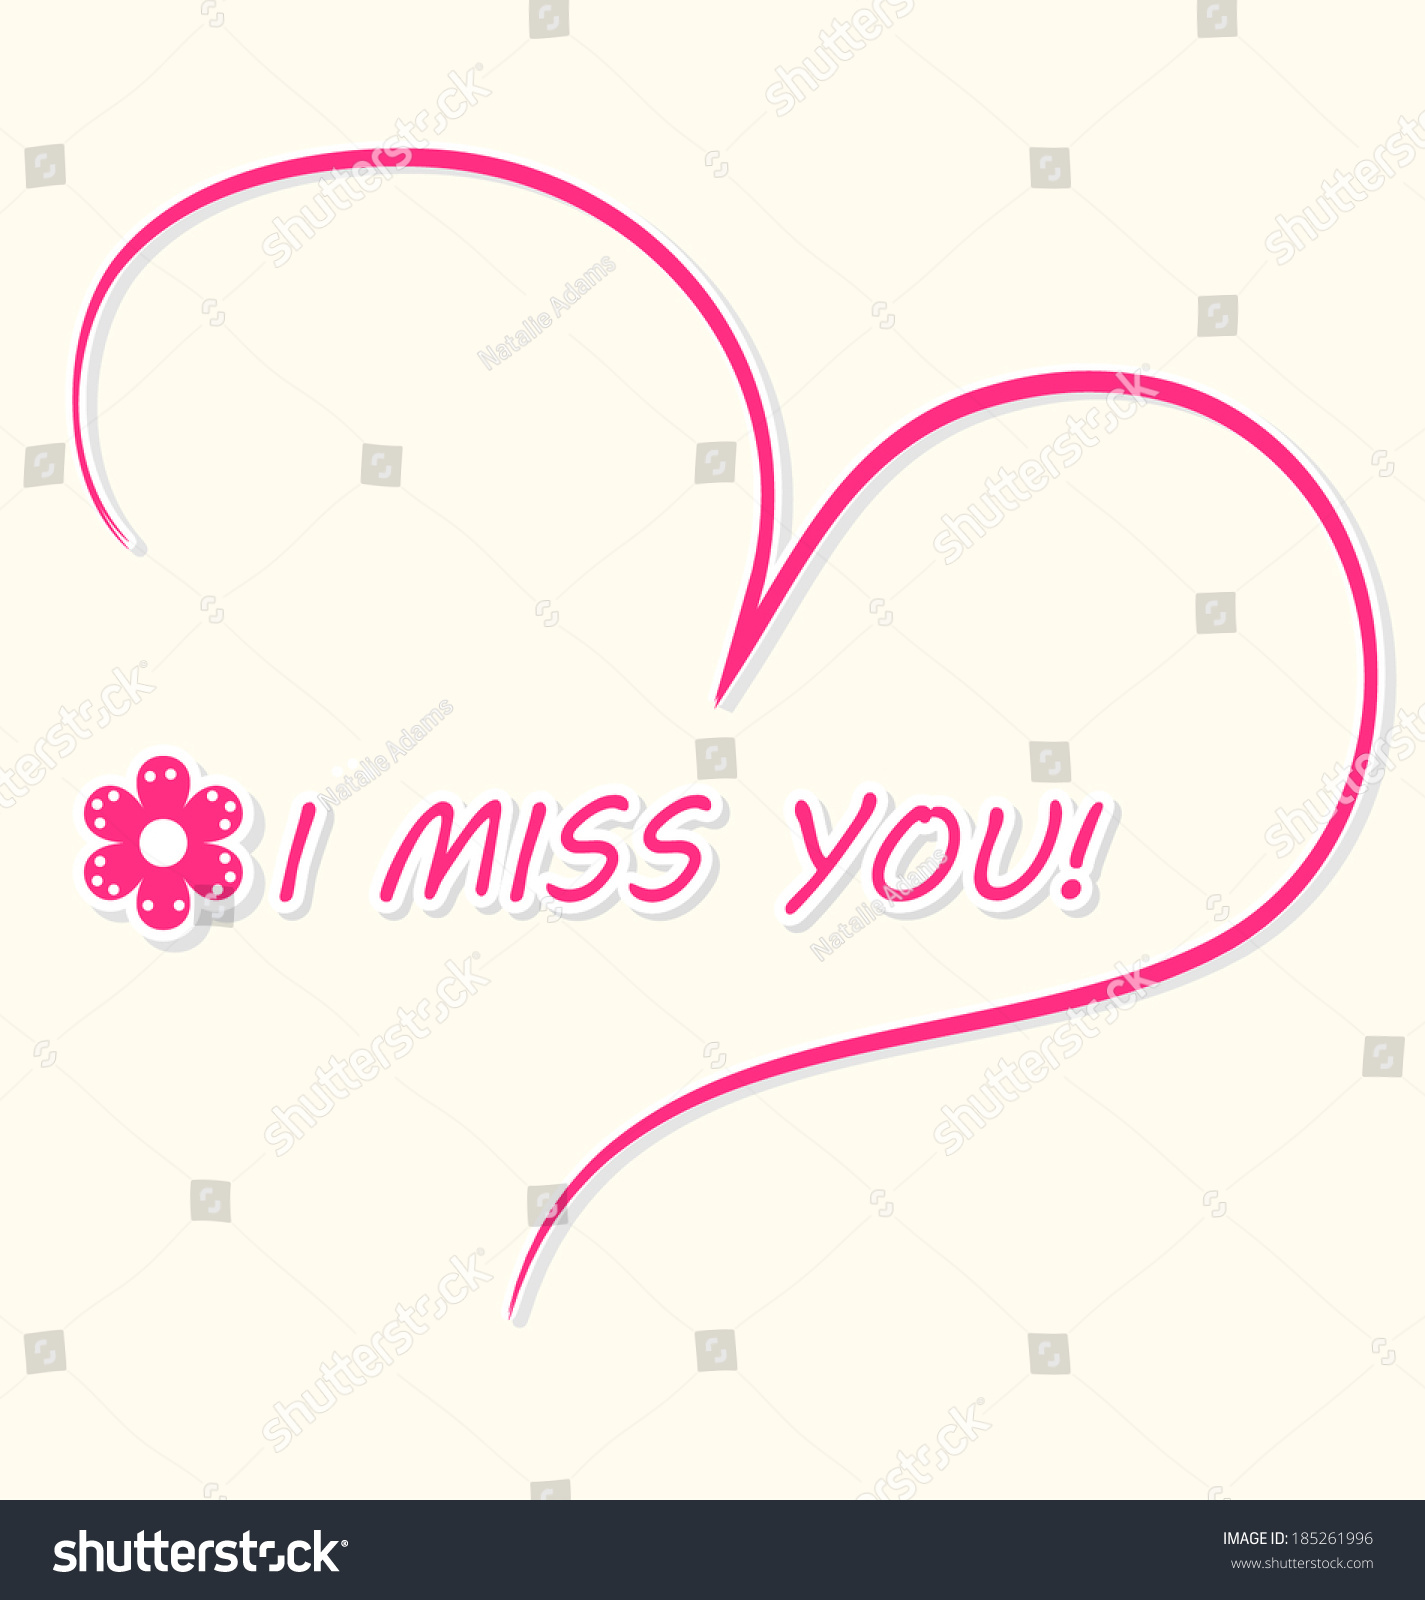 beautiful miss you card pink handdrawn stock vector royalty free 185261996 https www shutterstock com image vector beautiful miss you card pink handdrawn 185261996